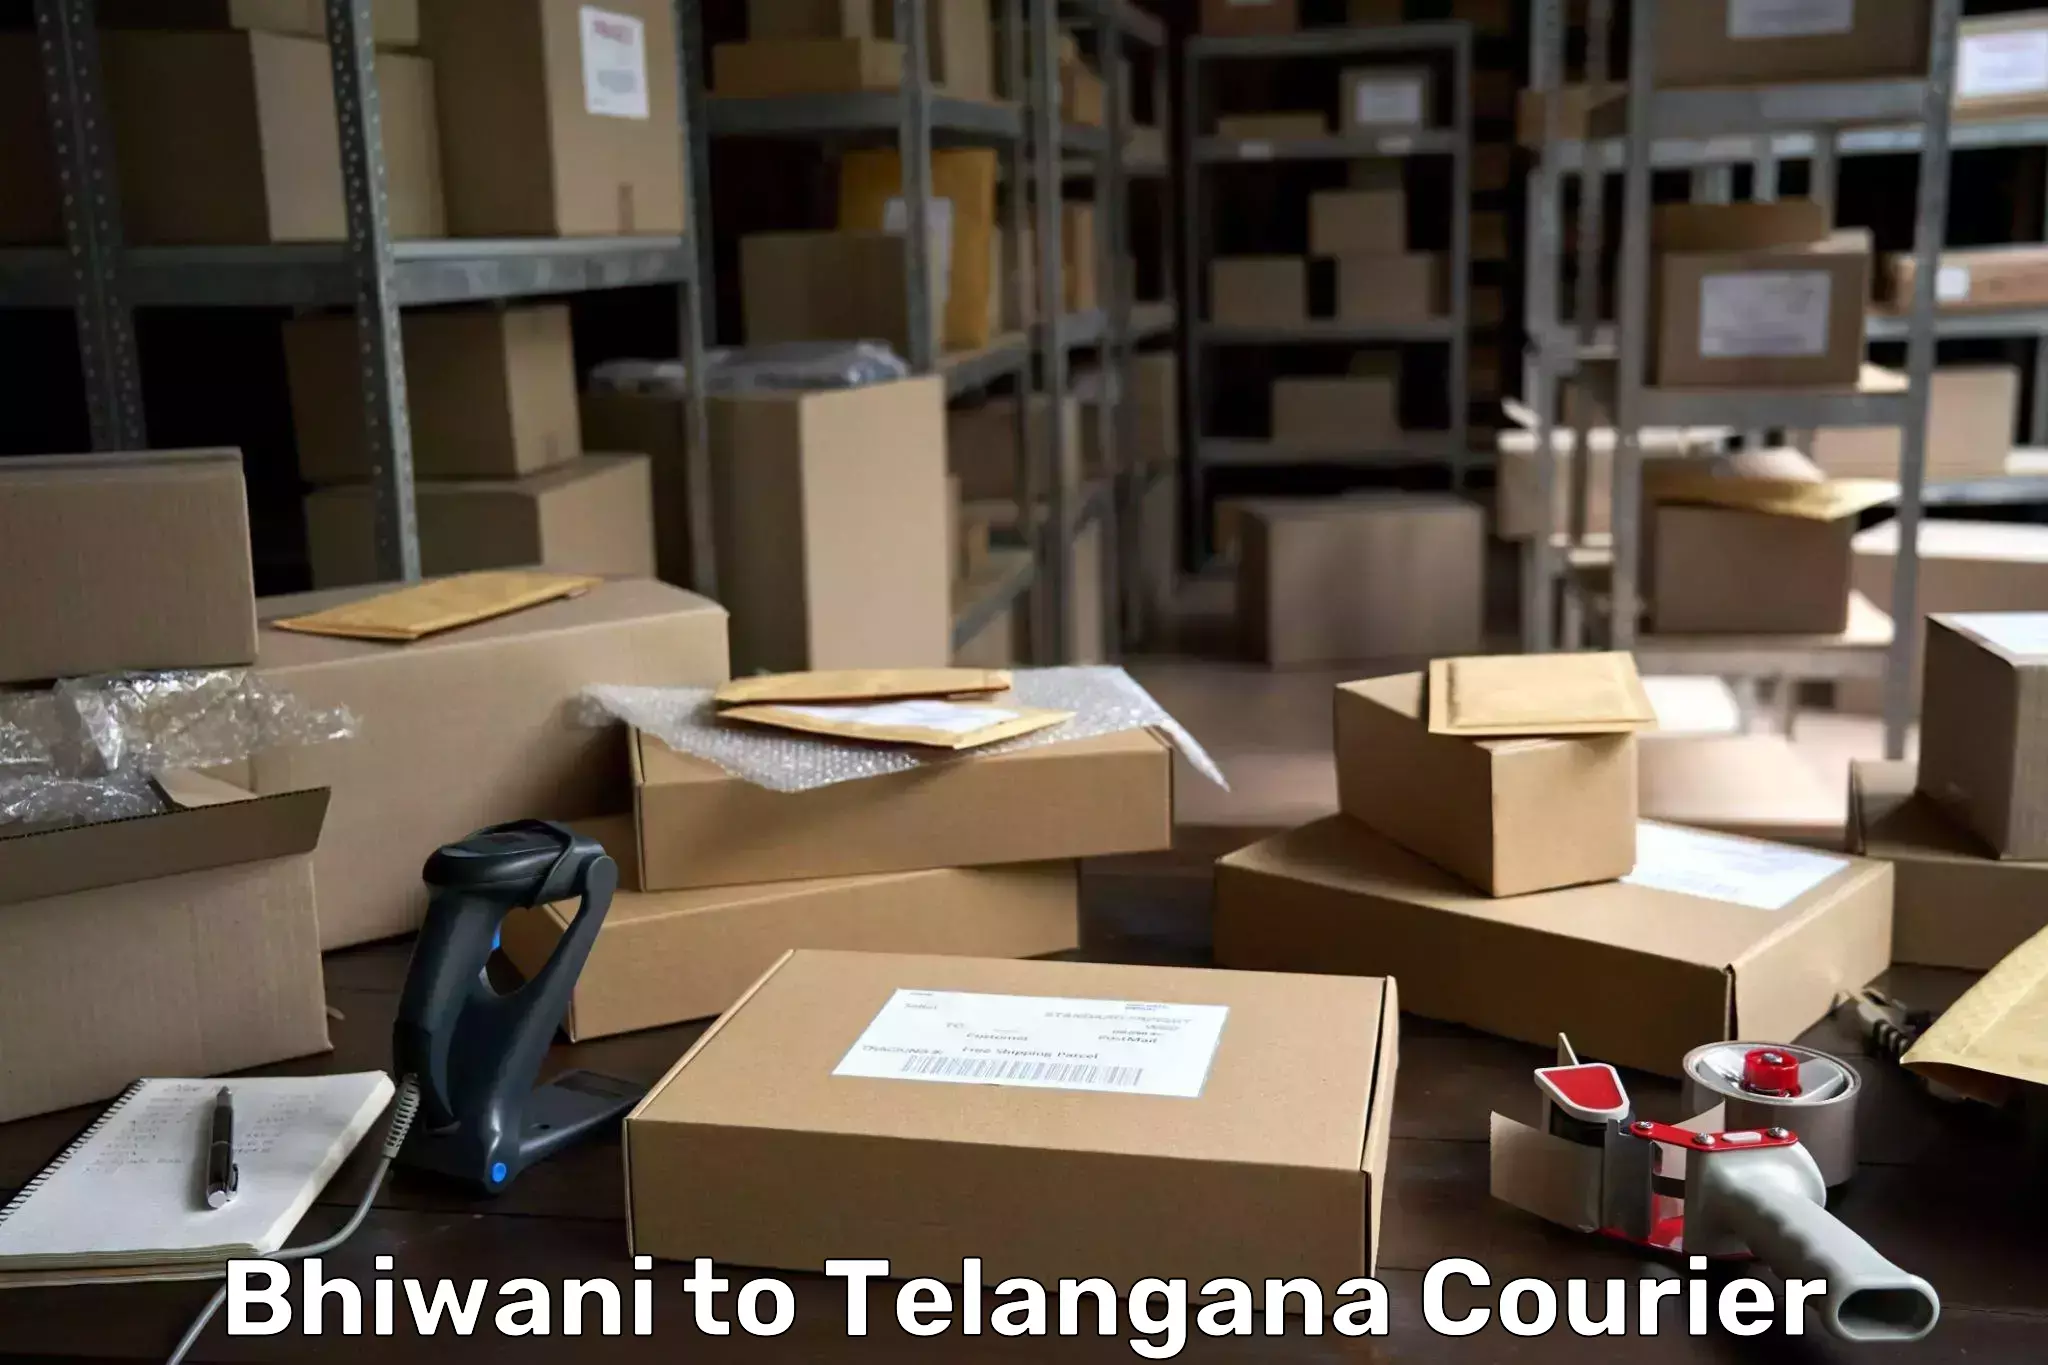 Nationwide parcel services Bhiwani to Chintoor